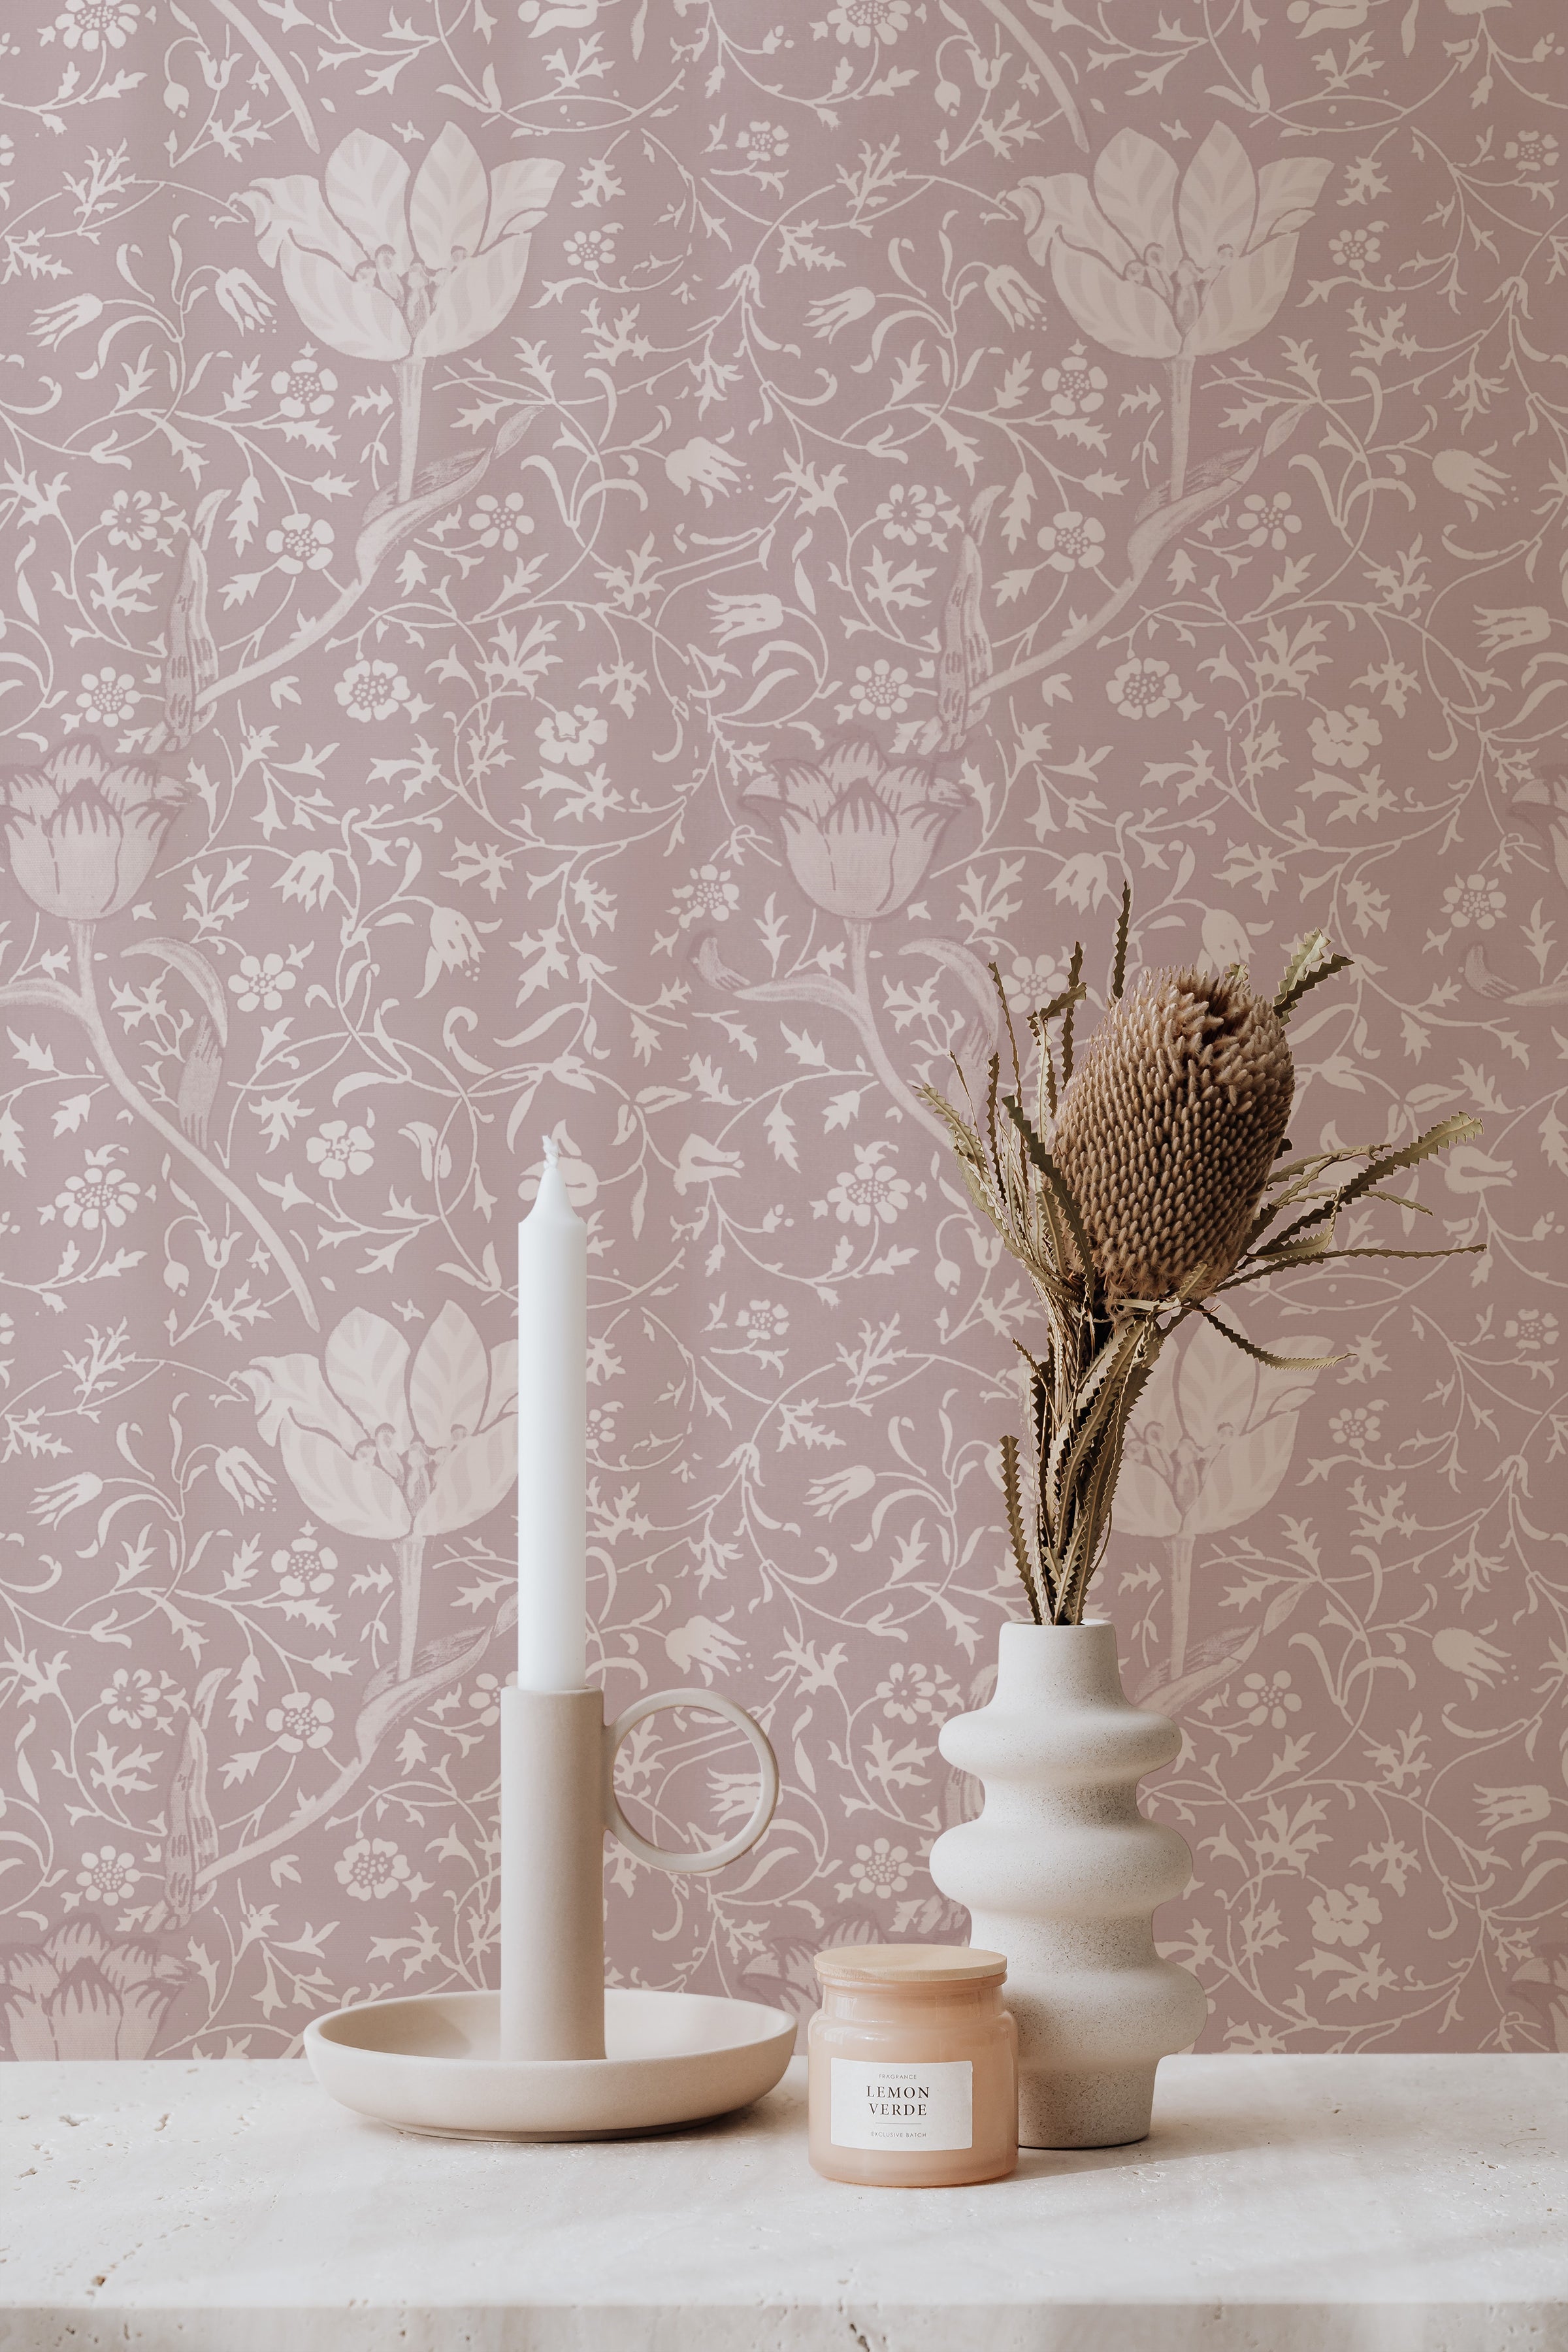 A styled scene showcasing Fiona Floral Wallpaper, featuring a detailed floral pattern in mauve on a soft pink background. The setup includes a modern candle holder and a textured ceramic vase with dried botanicals, creating a serene and stylish space